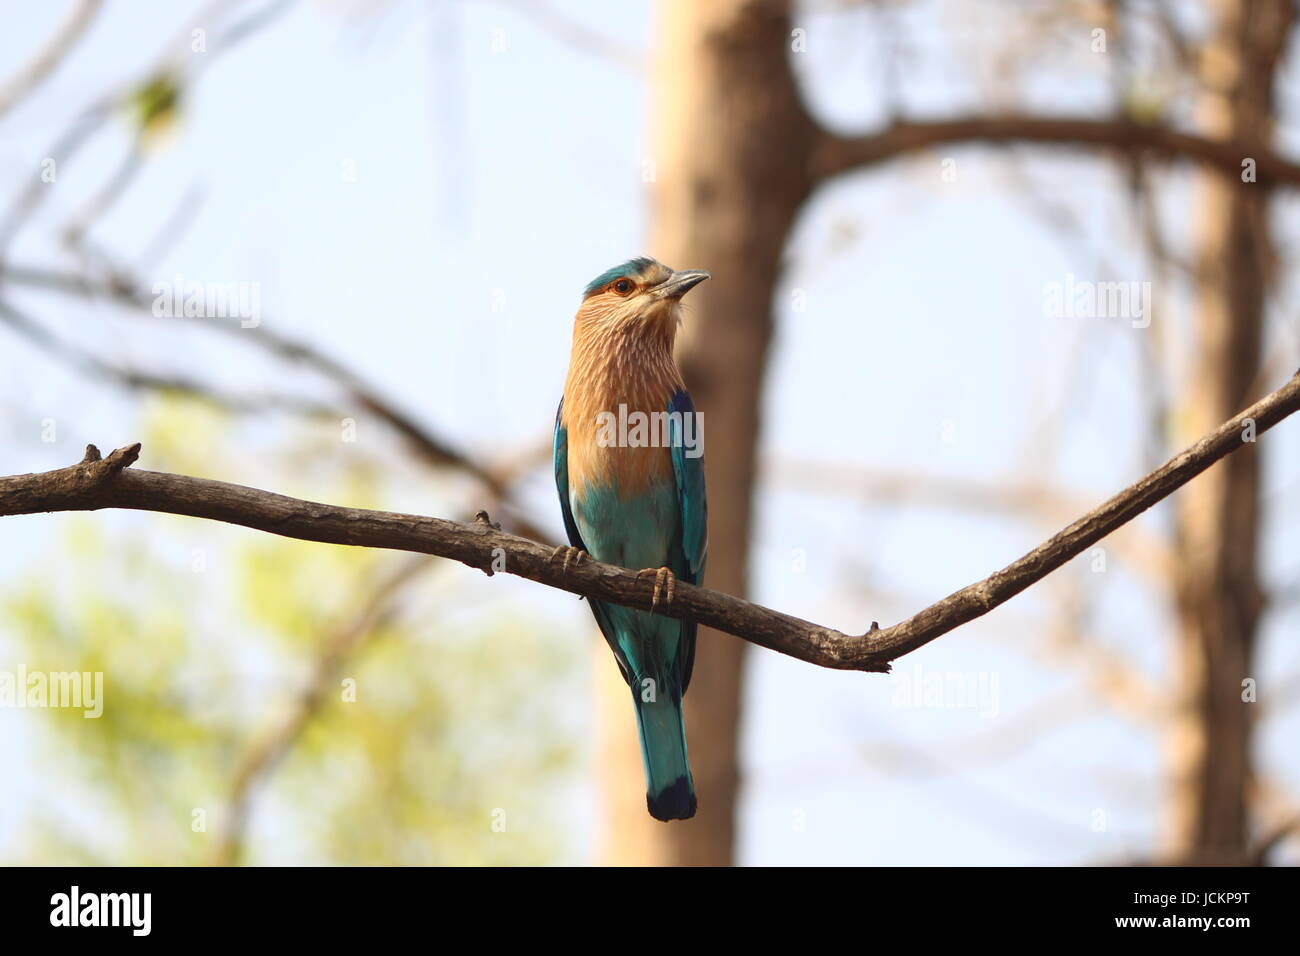 A blue bird sitting on the branch of a tree in the middle of fall. Stock Photo